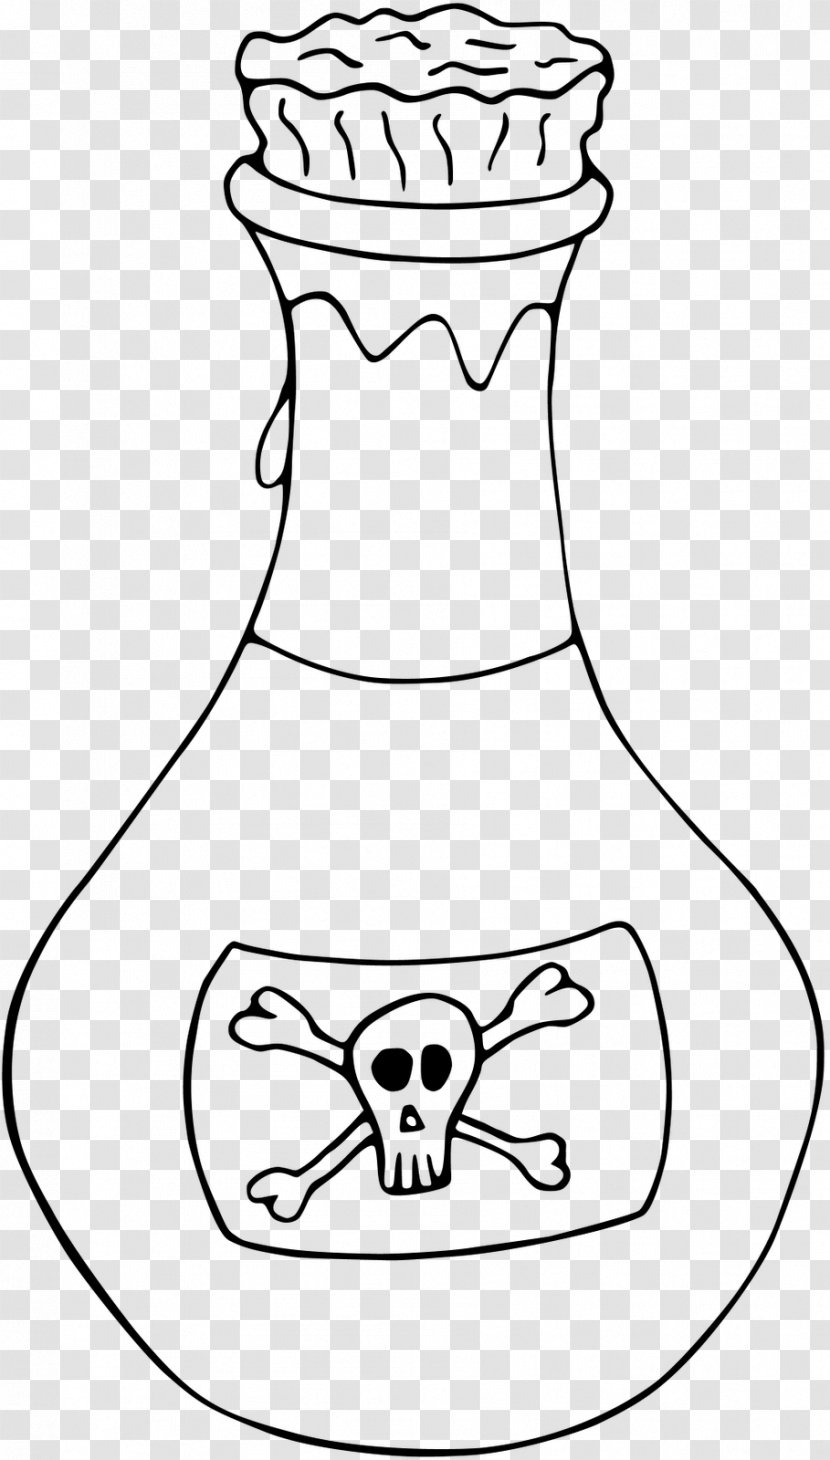 Poison Toxicity Skull And Crossbones Clip Art - Black White Transparent PNG